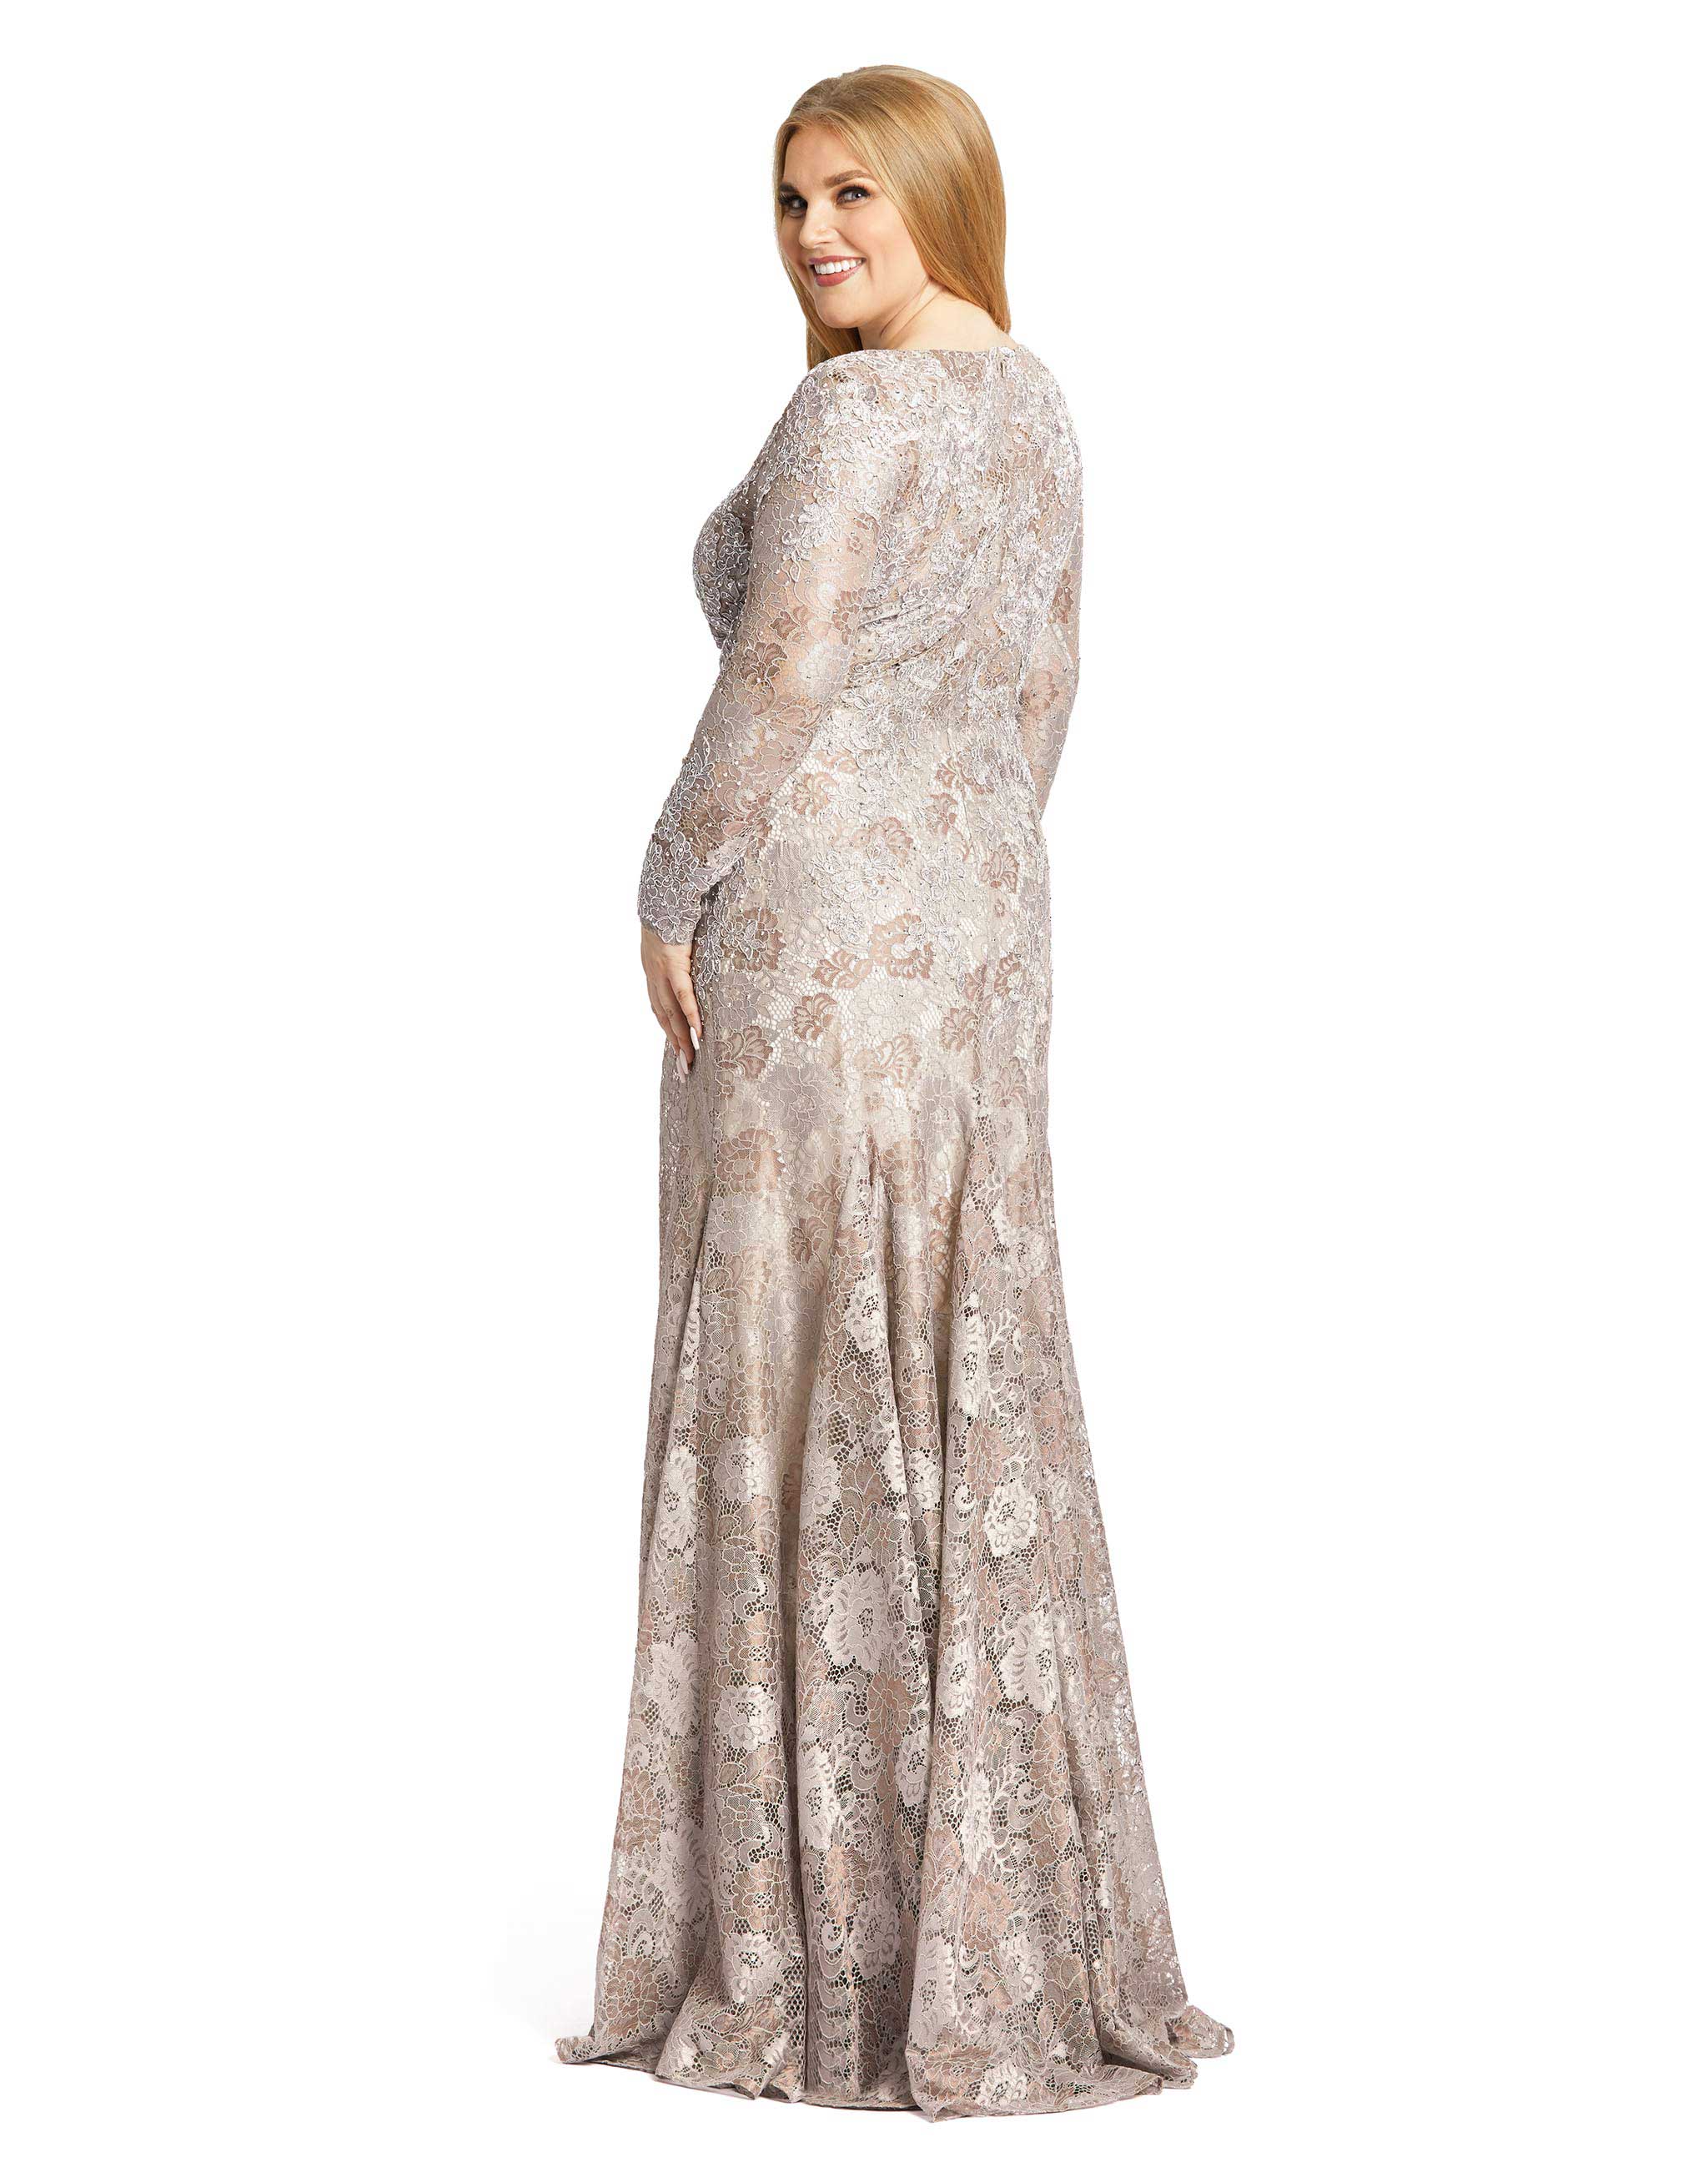 Plunge Neck Embellished Lace Gown (Plus)